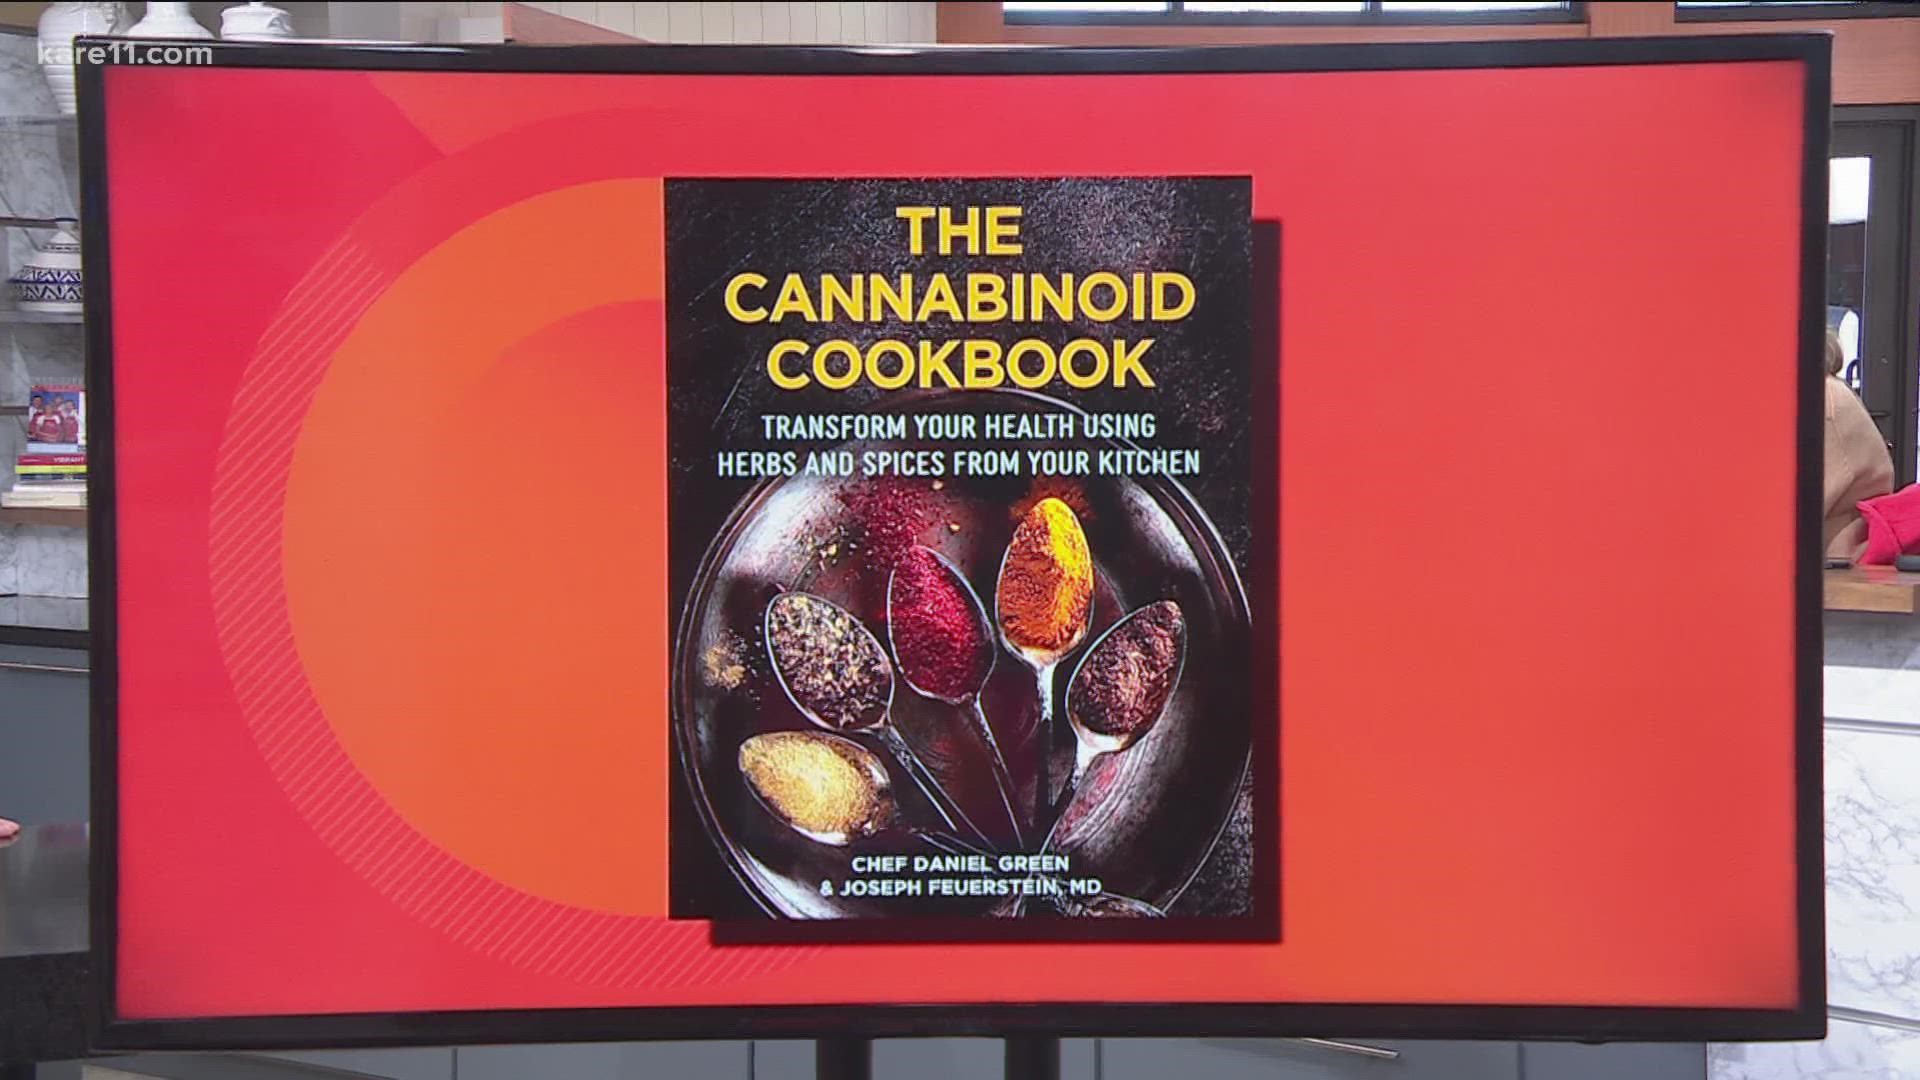 During KARE11 Saturday, Chef Green showed one of the recipes from his newest recipe book, "The Cannabinoid Cookbook."